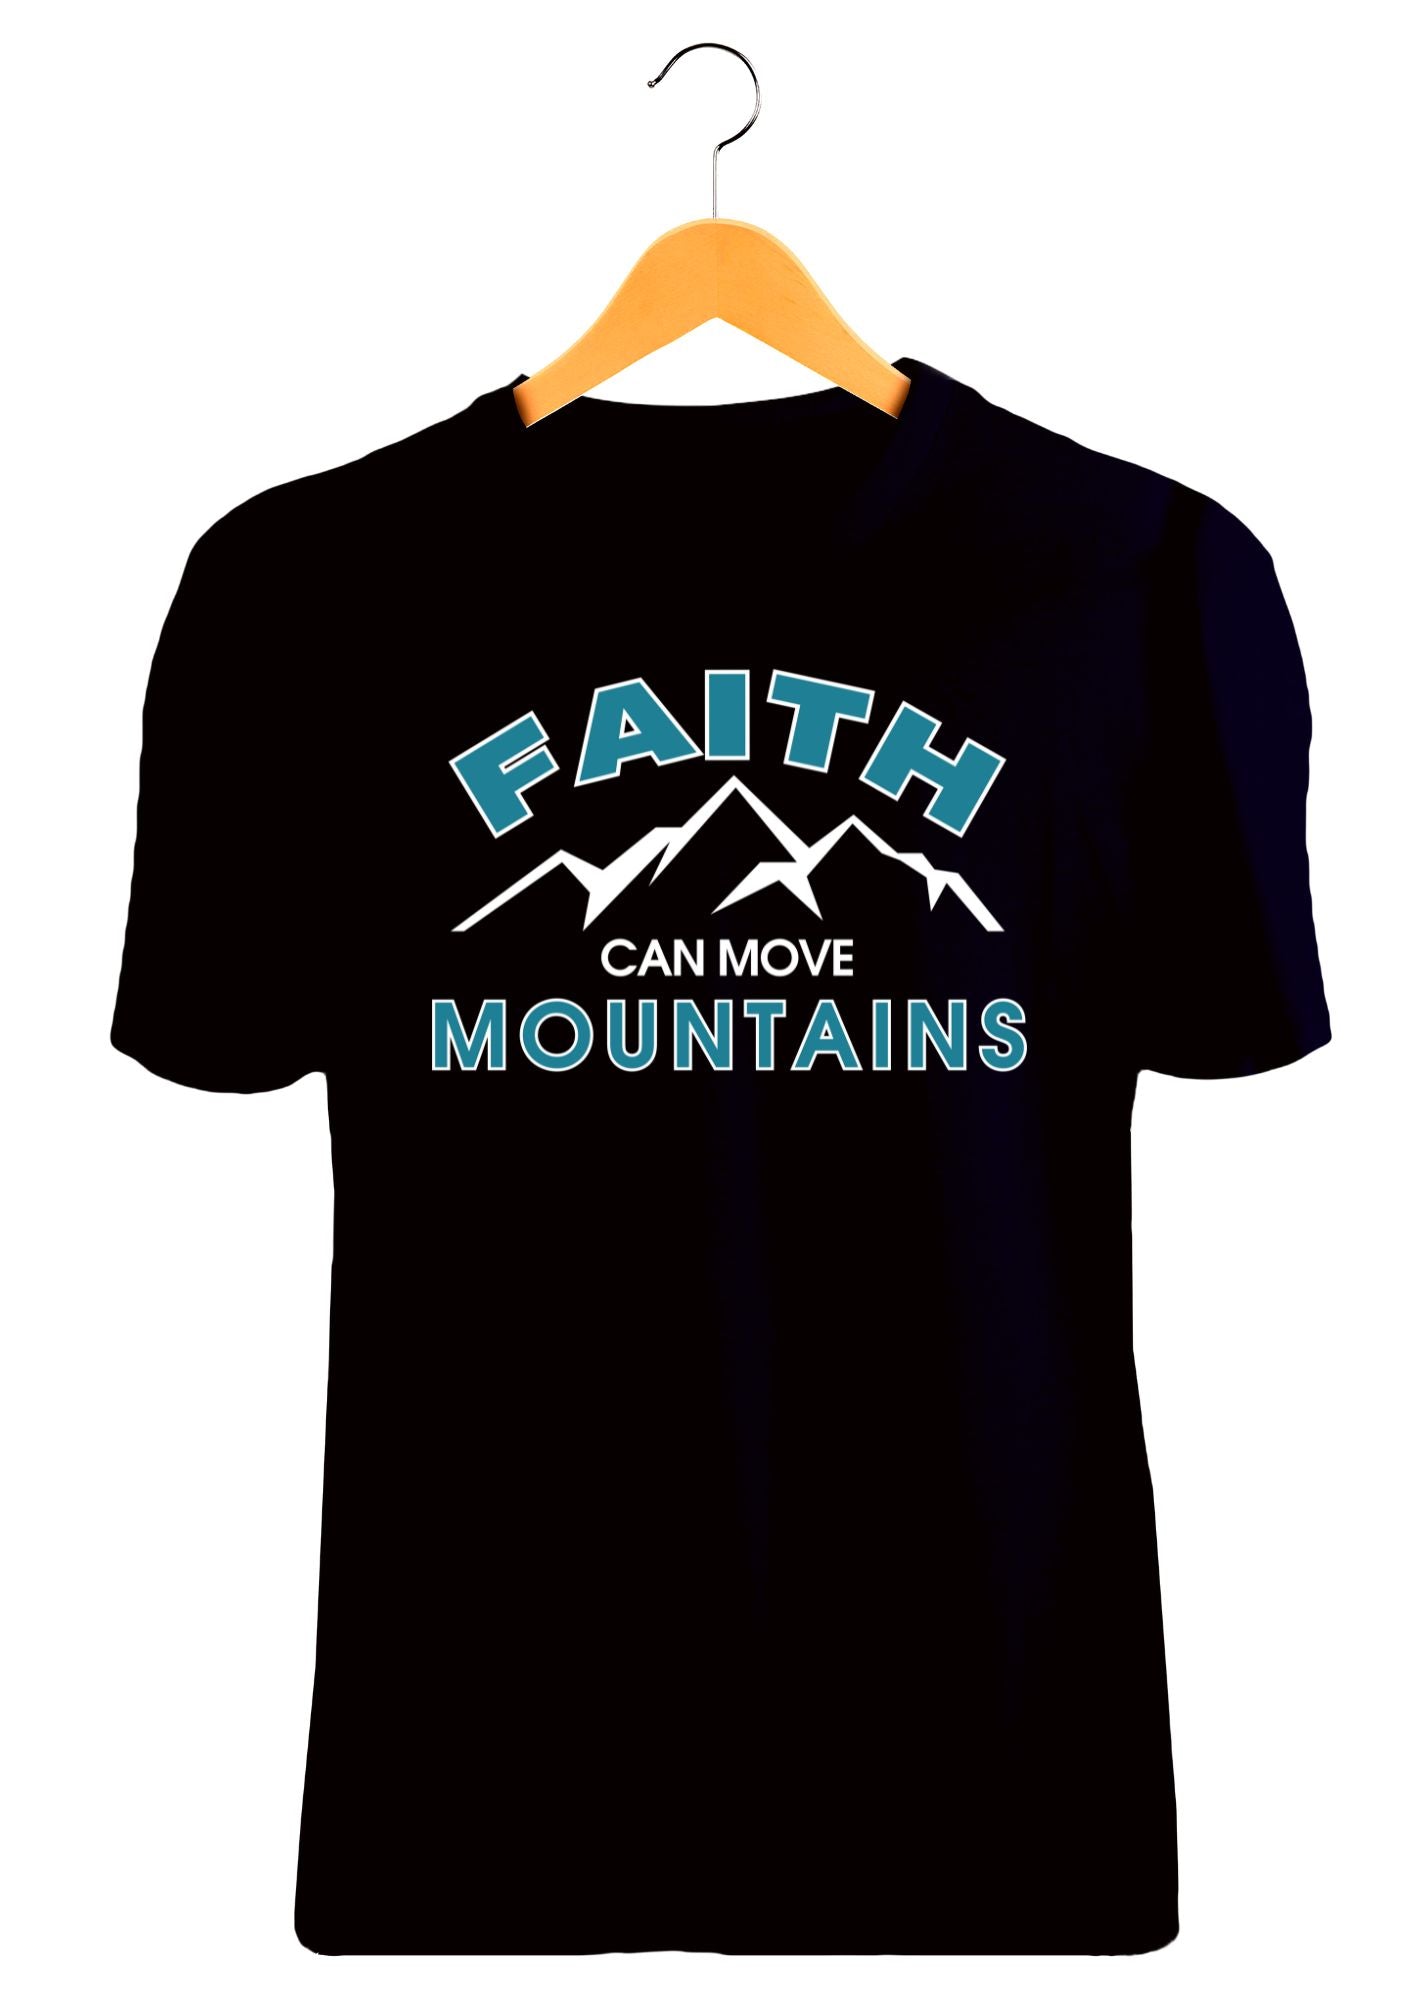 Faith can move mountains – Discovery House Distributors Pvt Ltd